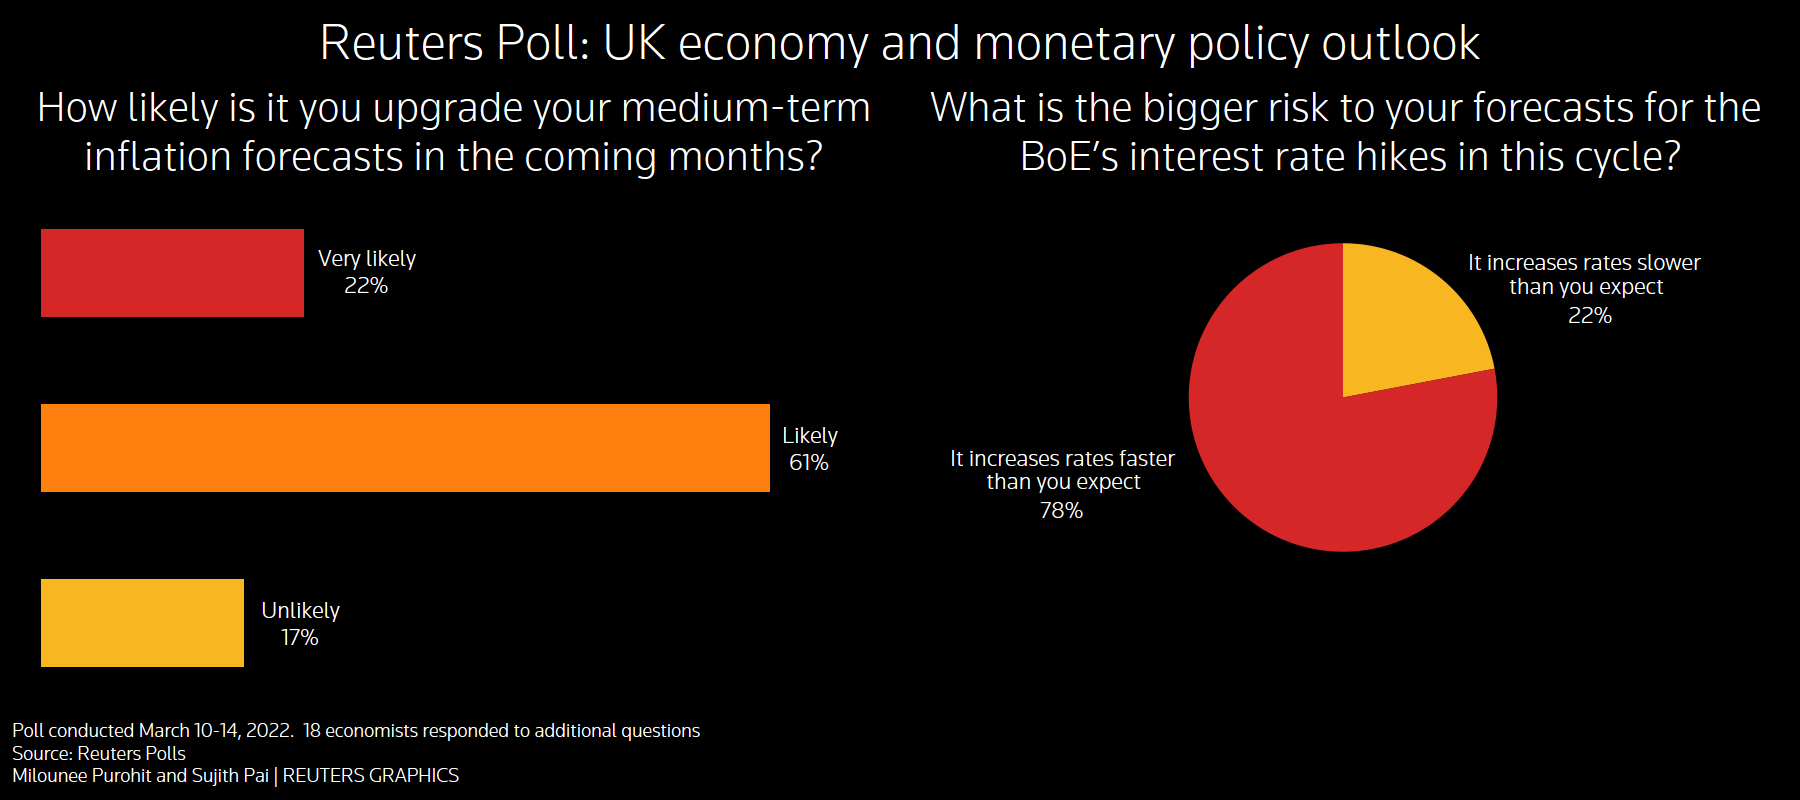 Chart from a Reuters poll on the UK economy and monetary policy outlook